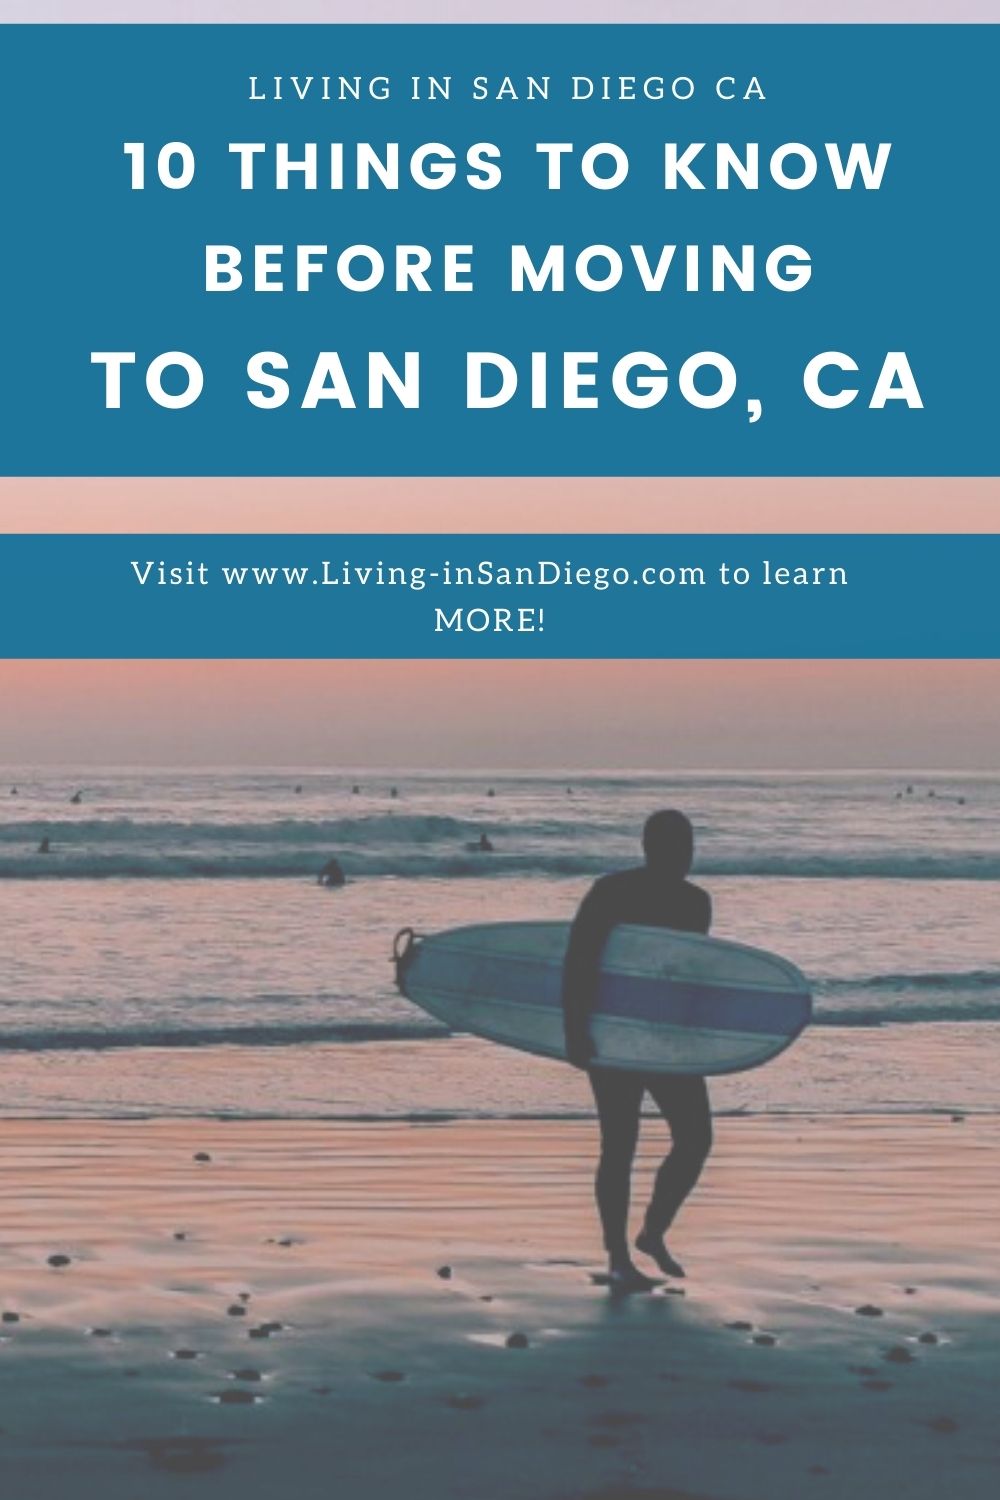 10 things to know before moving to San Diego, Living in San Diego real estate 1